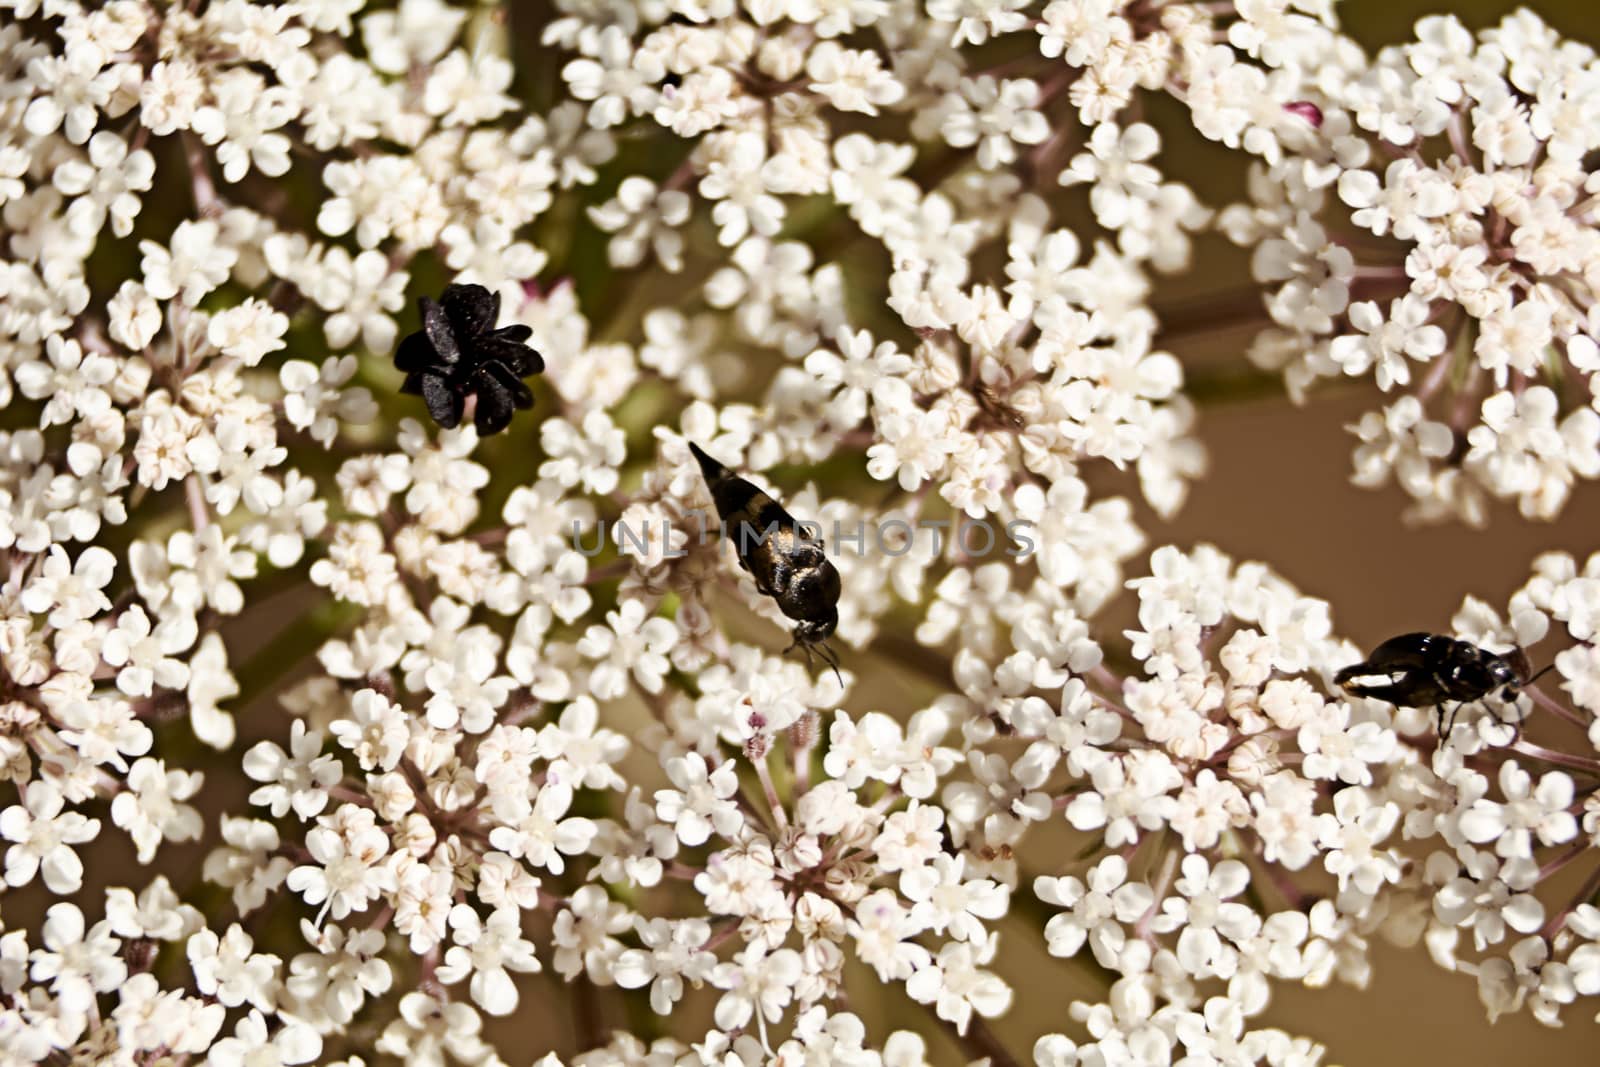 Insects eating pollen on white flowers by raul_ruiz